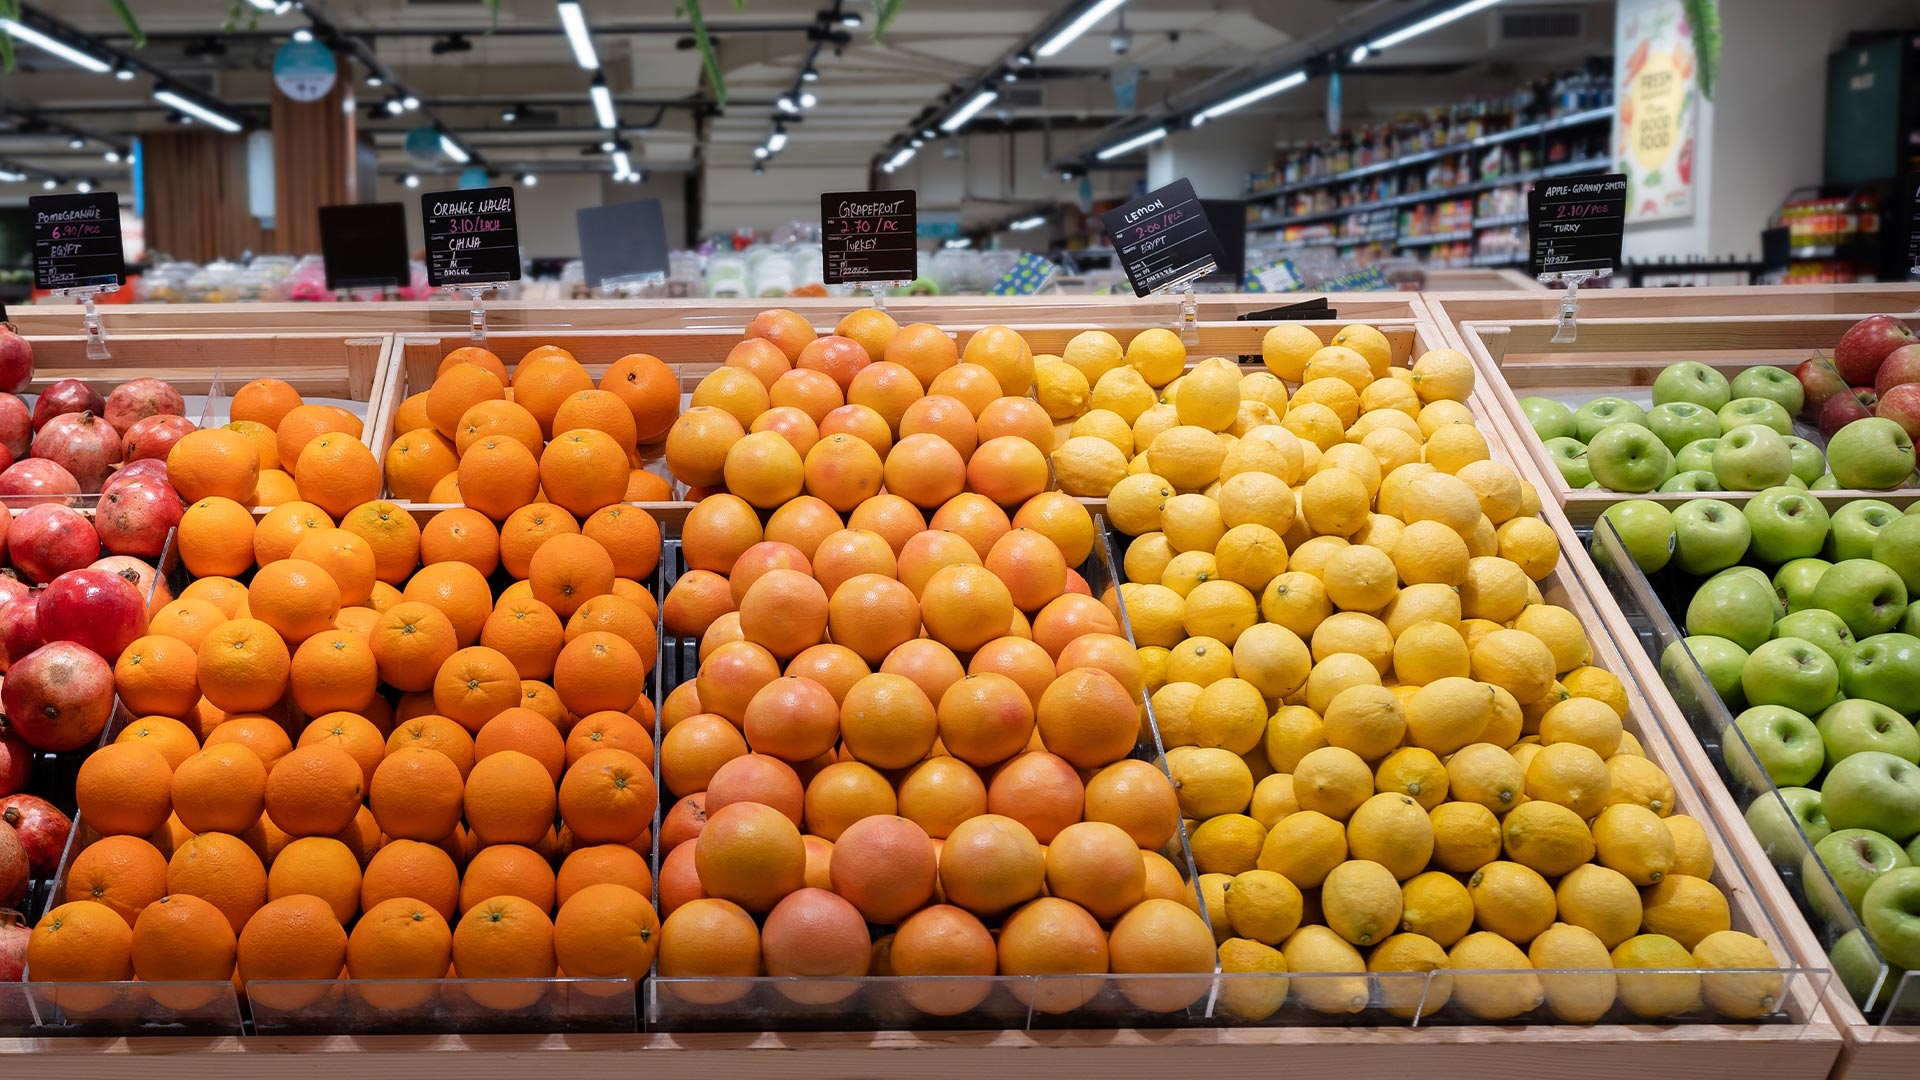 Selection of fruits and vegetables at a supermarket in Marina Bay Sands